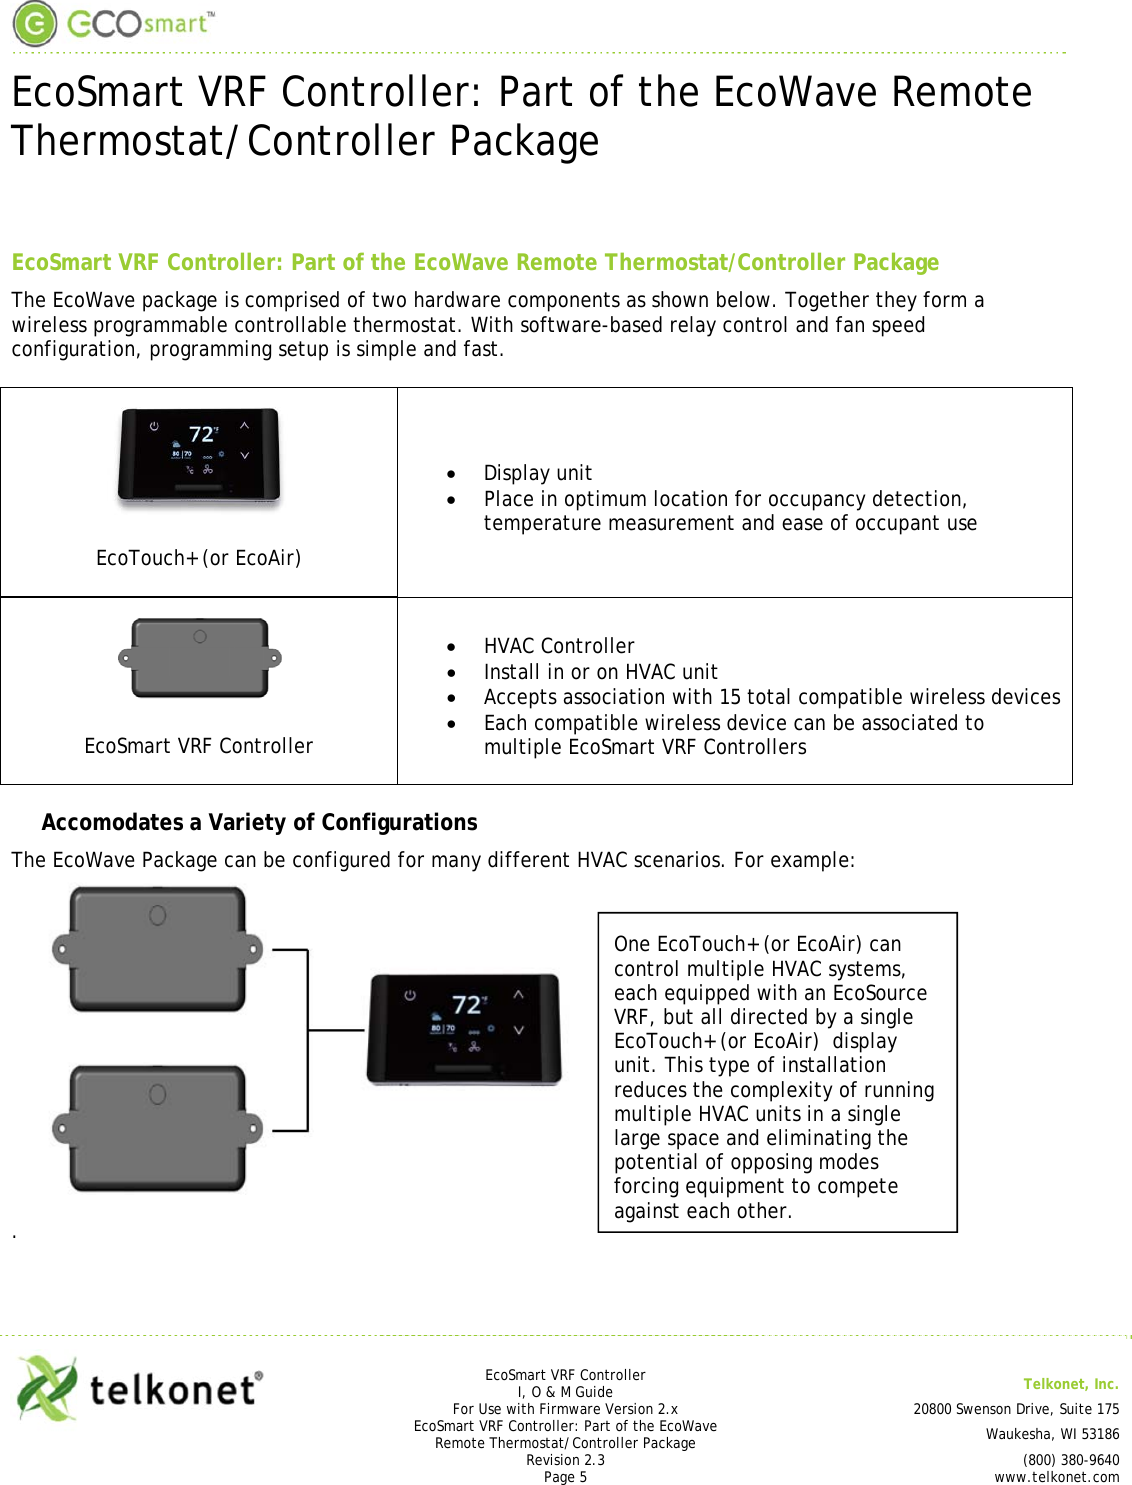  EcoSmart VRF Controller: Part of the EcoWave Remote Thermostat/Controller Package     EcoSmart VRF Controller I, O &amp; M Guide  Telkonet, Inc. For Use with Firmware Version 2.x 20800 Swenson Drive, Suite 175 EcoSmart VRF Controller: Part of the EcoWave Remote Thermostat/Controller Package  Waukesha, WI 53186 Revision 2.3   (800) 380-9640 Page 5 www.telkonet.com  EcoSmart VRF Controller: Part of the EcoWave Remote Thermostat/Controller Package The EcoWave package is comprised of two hardware components as shown below. Together they form a wireless programmable controllable thermostat. With software-based relay control and fan speed configuration, programming setup is simple and fast.  EcoTouch+ (or EcoAir)  Display unit  Place in optimum location for occupancy detection, temperature measurement and ease of occupant use  EcoSmart VRF Controller  HVAC Controller  Install in or on HVAC unit  Accepts association with 15 total compatible wireless devices  Each compatible wireless device can be associated to multiple EcoSmart VRF Controllers Accomodates a Variety of Configurations The EcoWave Package can be configured for many different HVAC scenarios. For example:   .   One EcoTouch+ (or EcoAir) can control multiple HVAC systems, each equipped with an EcoSource VRF, but all directed by a single EcoTouch+ (or EcoAir)  display unit. This type of installation reduces the complexity of running multiple HVAC units in a single large space and eliminating the potential of opposing modes forcing equipment to compete against each other. 